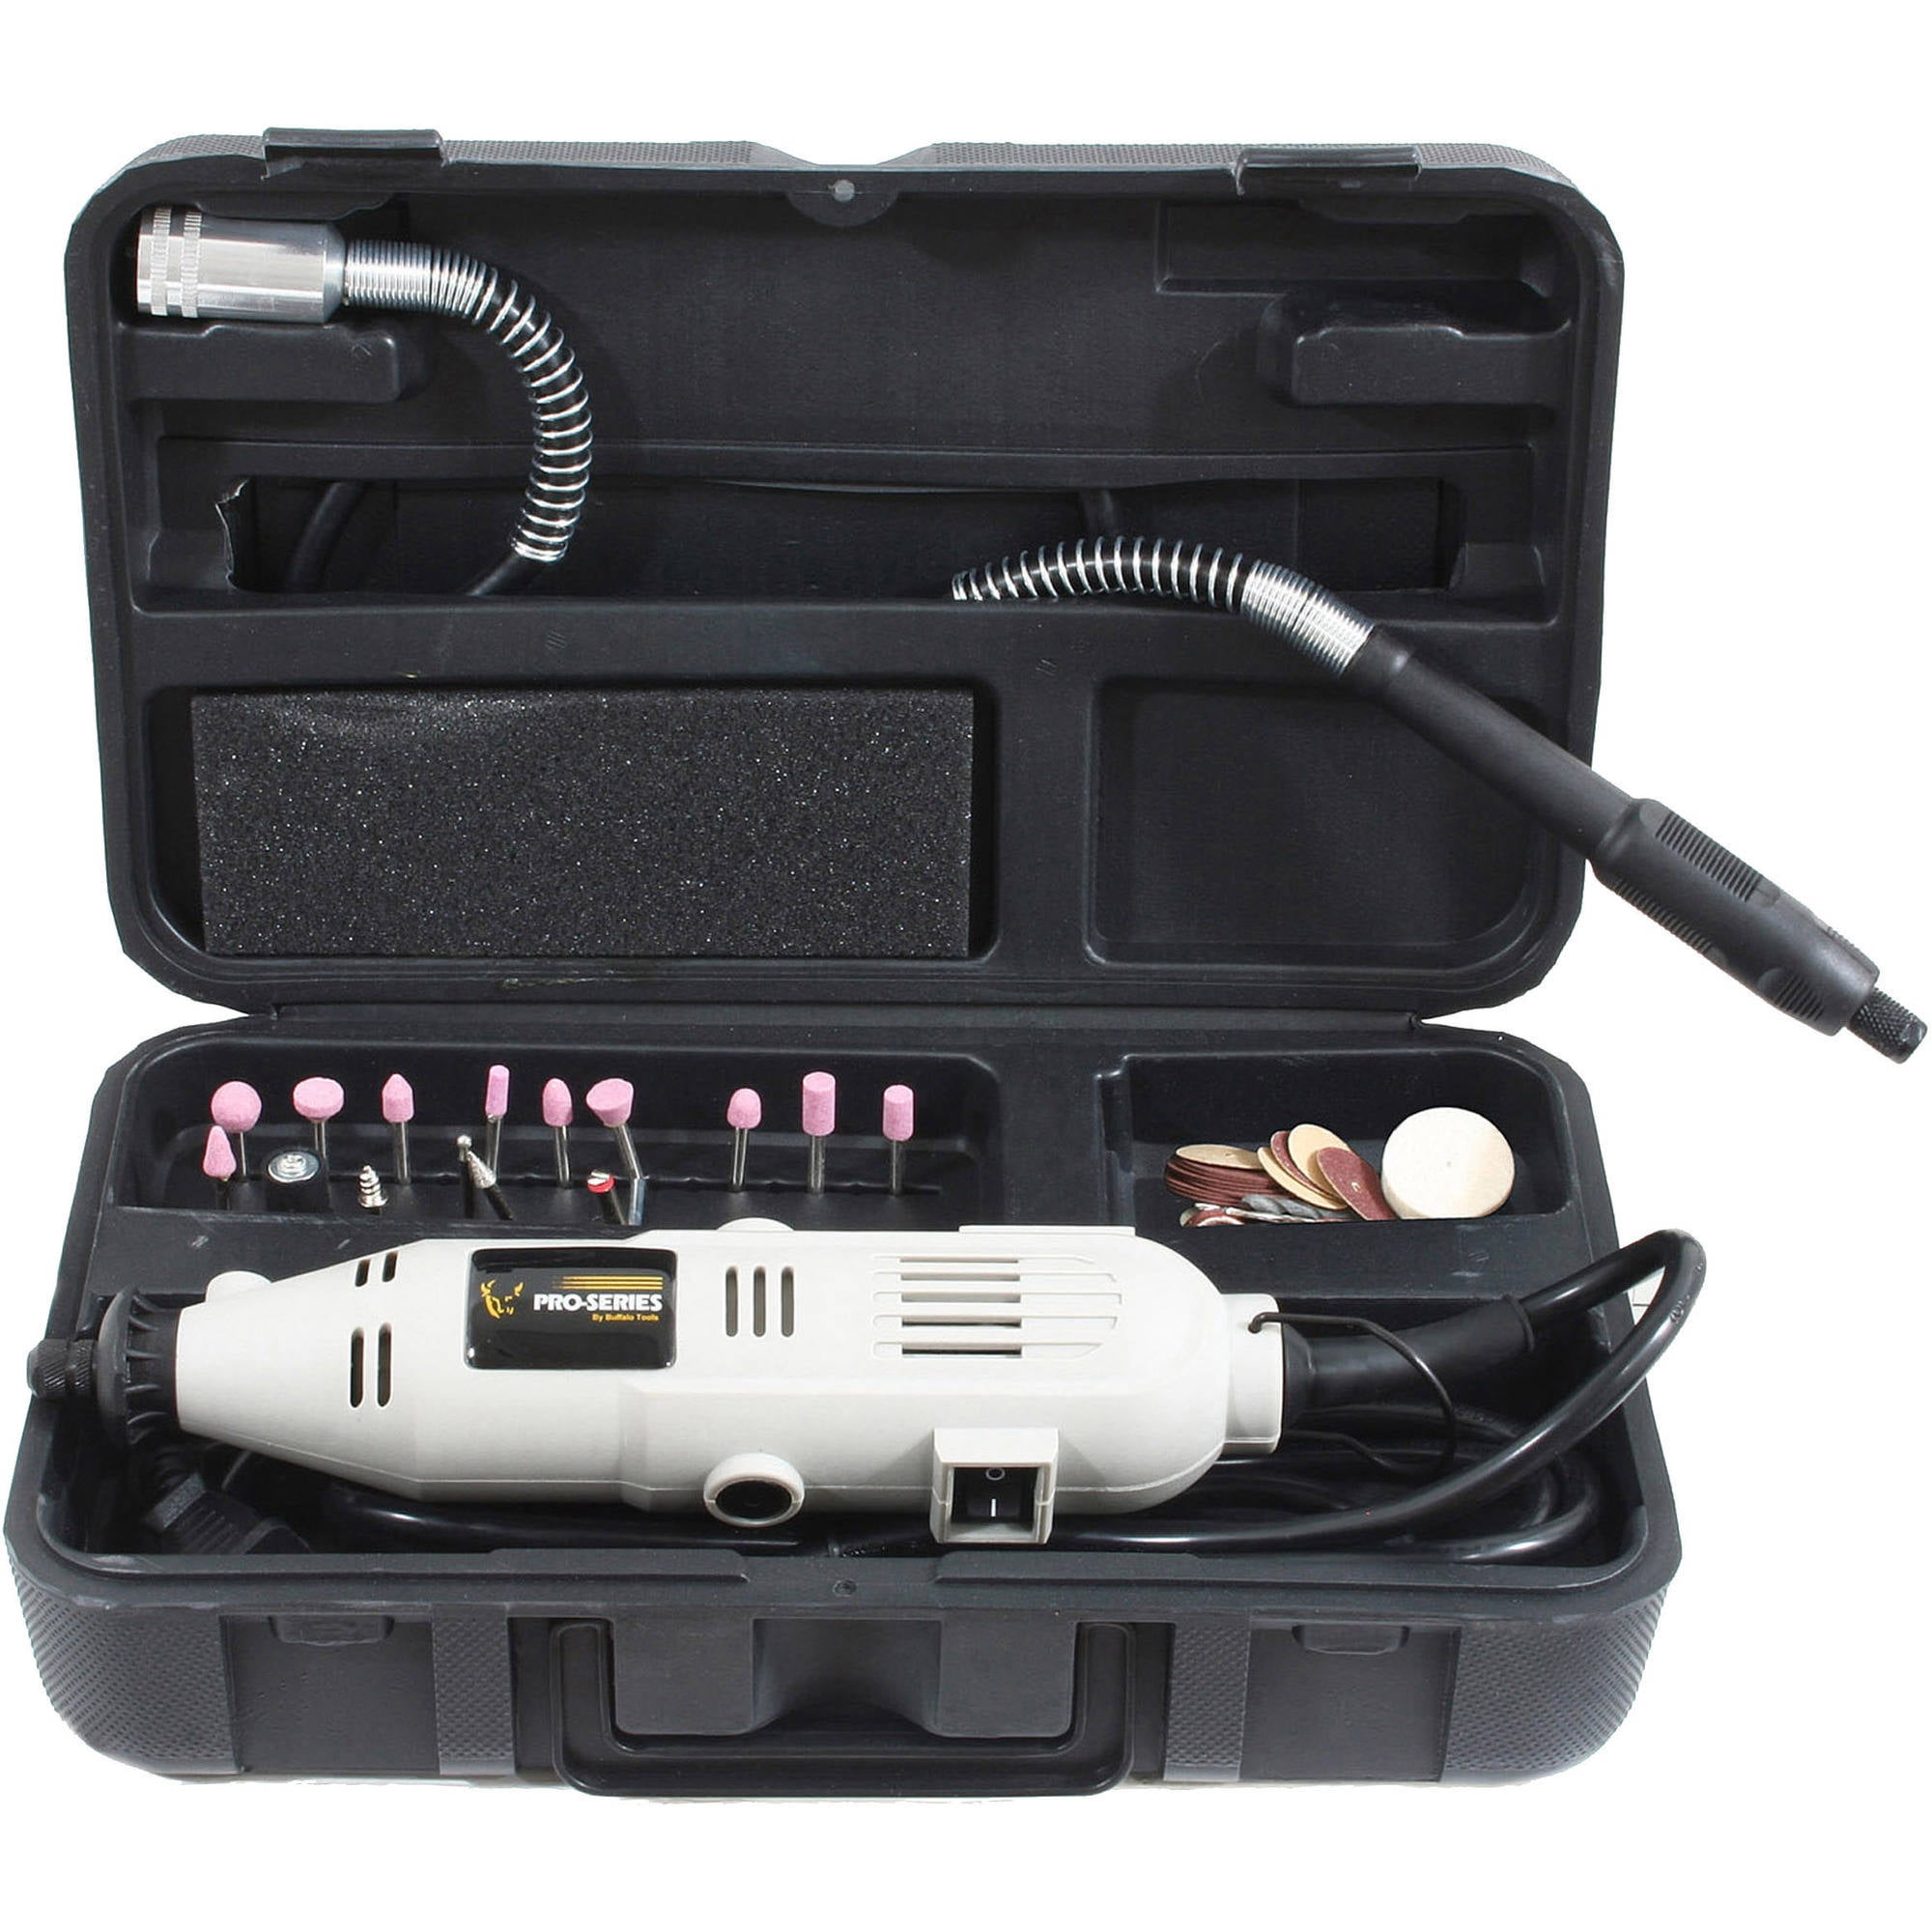 WEN 2307 Variable Speed Rotary Tool Kit with 100-Piece Accessories